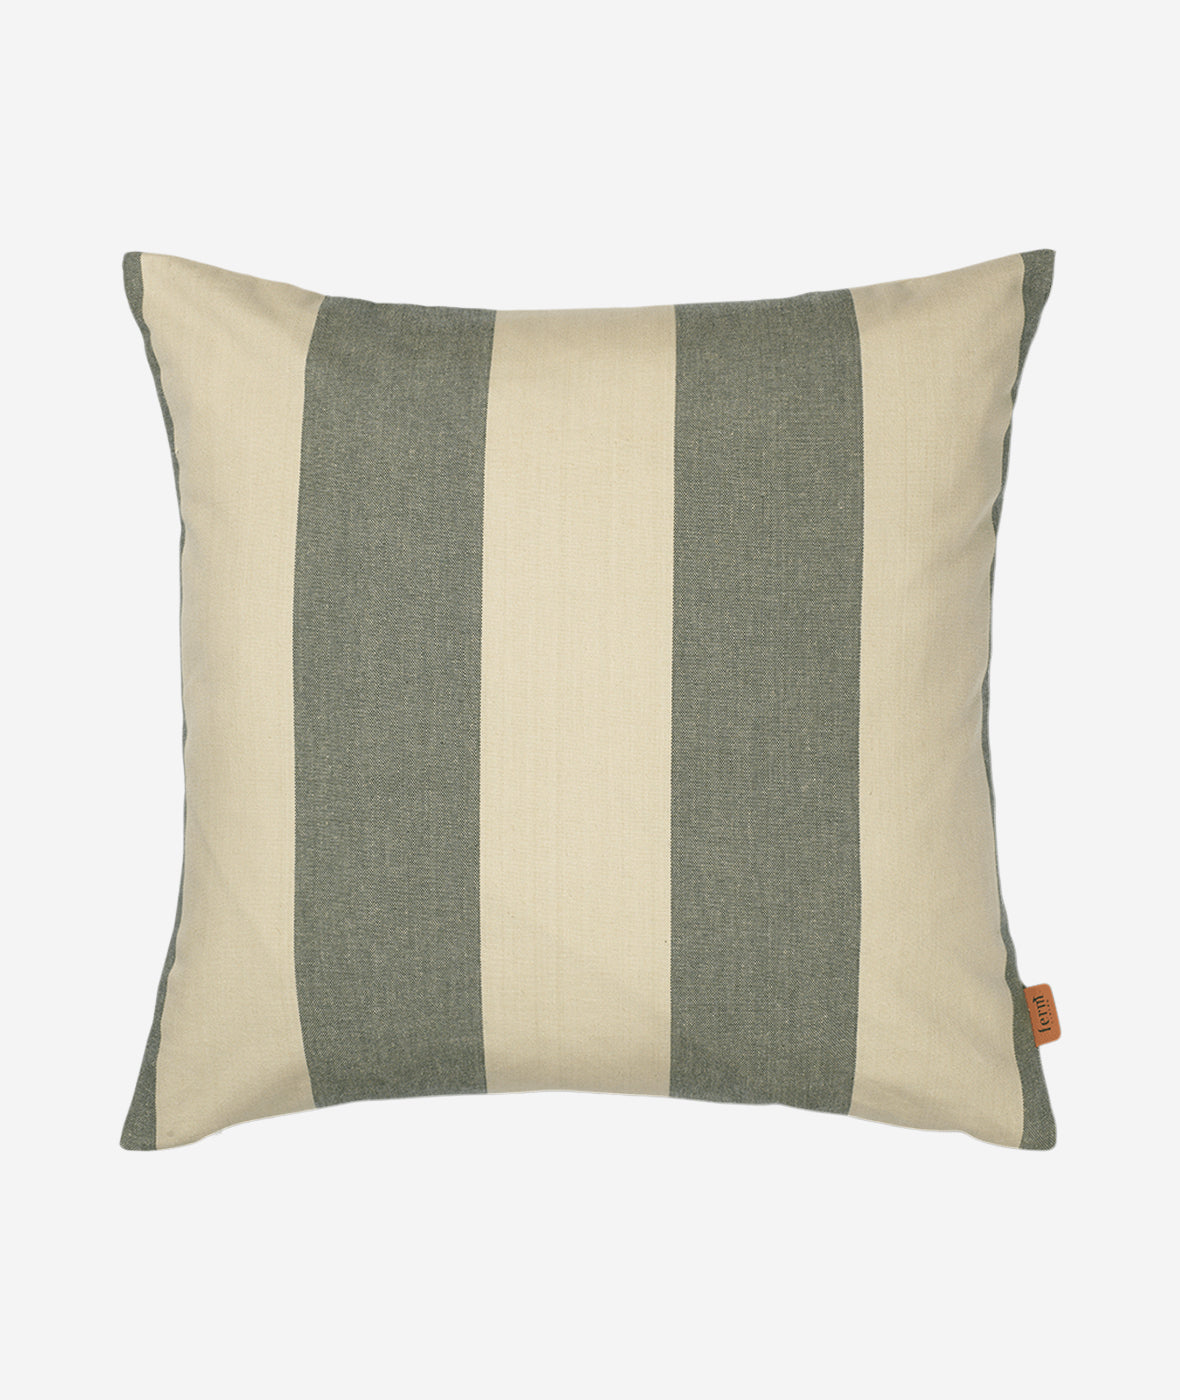 Strand Outdoor Pillow - More Options